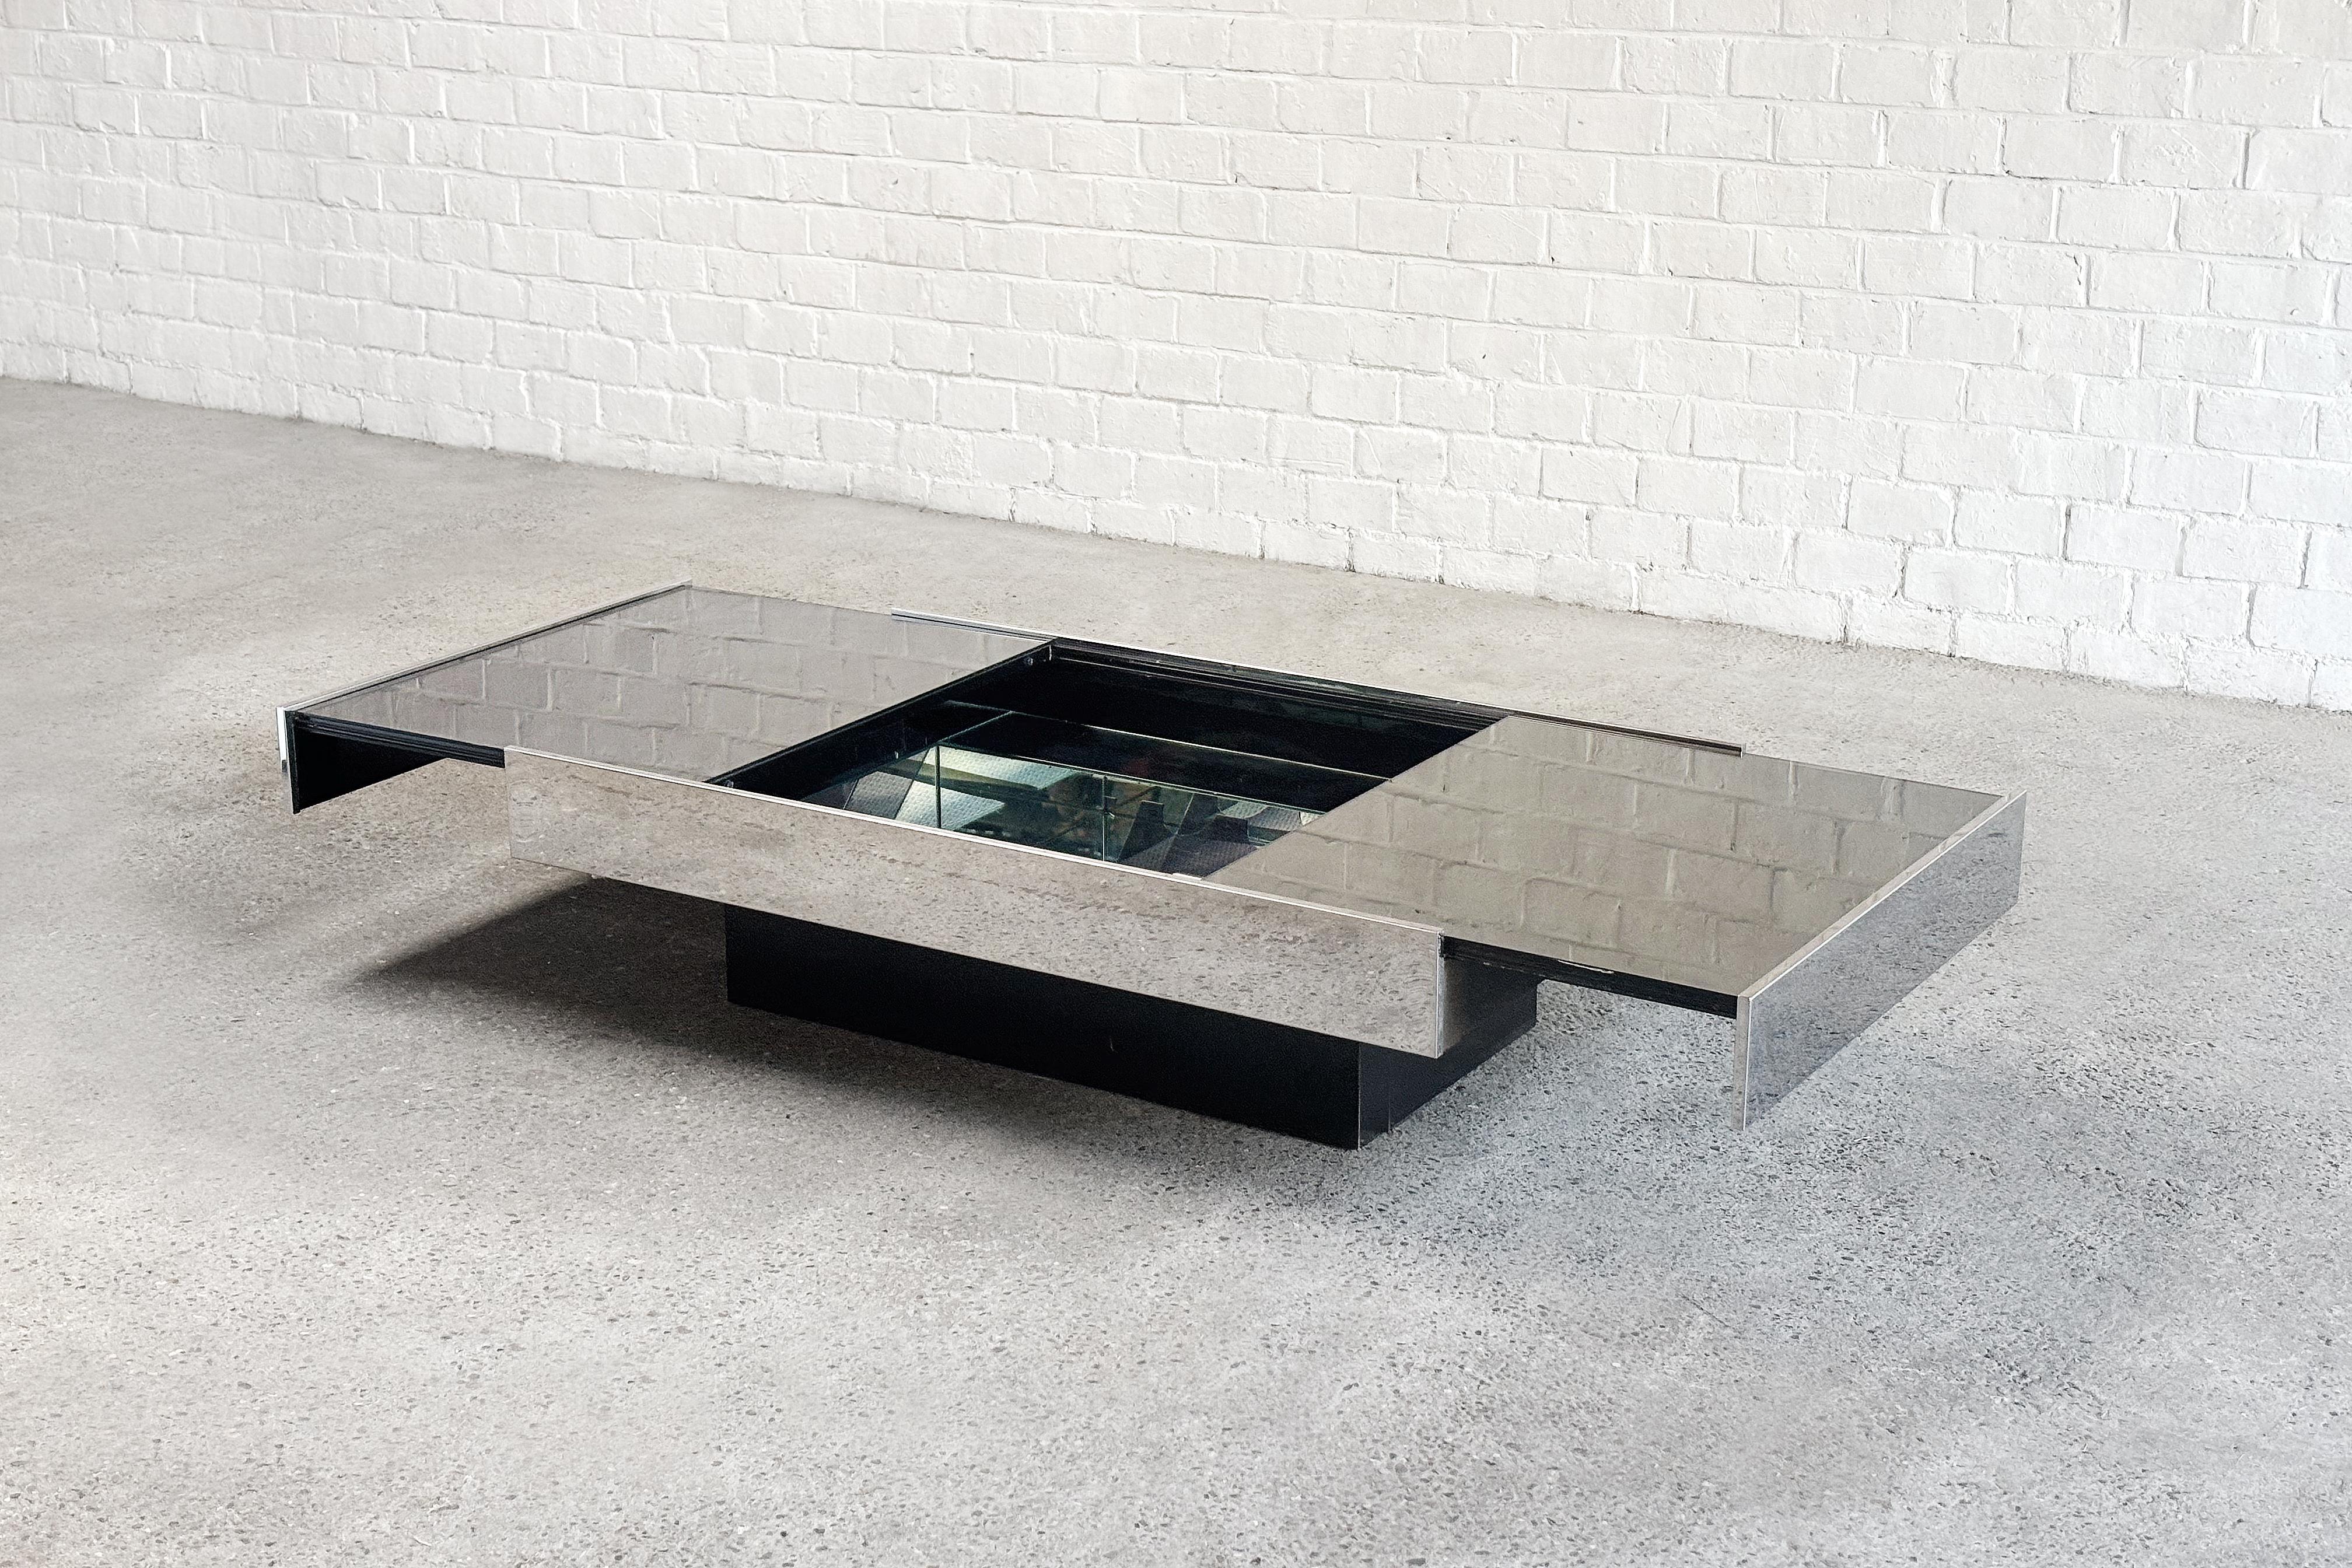 Spectacular Italian Coffee table designed by Willy Rizzo for Cidue,  circa 1970. When extended, this table contains a hidden mirrored dry bar with plenty of storage room. It features a chrome frame raised on a lacquered black wooden base topped with